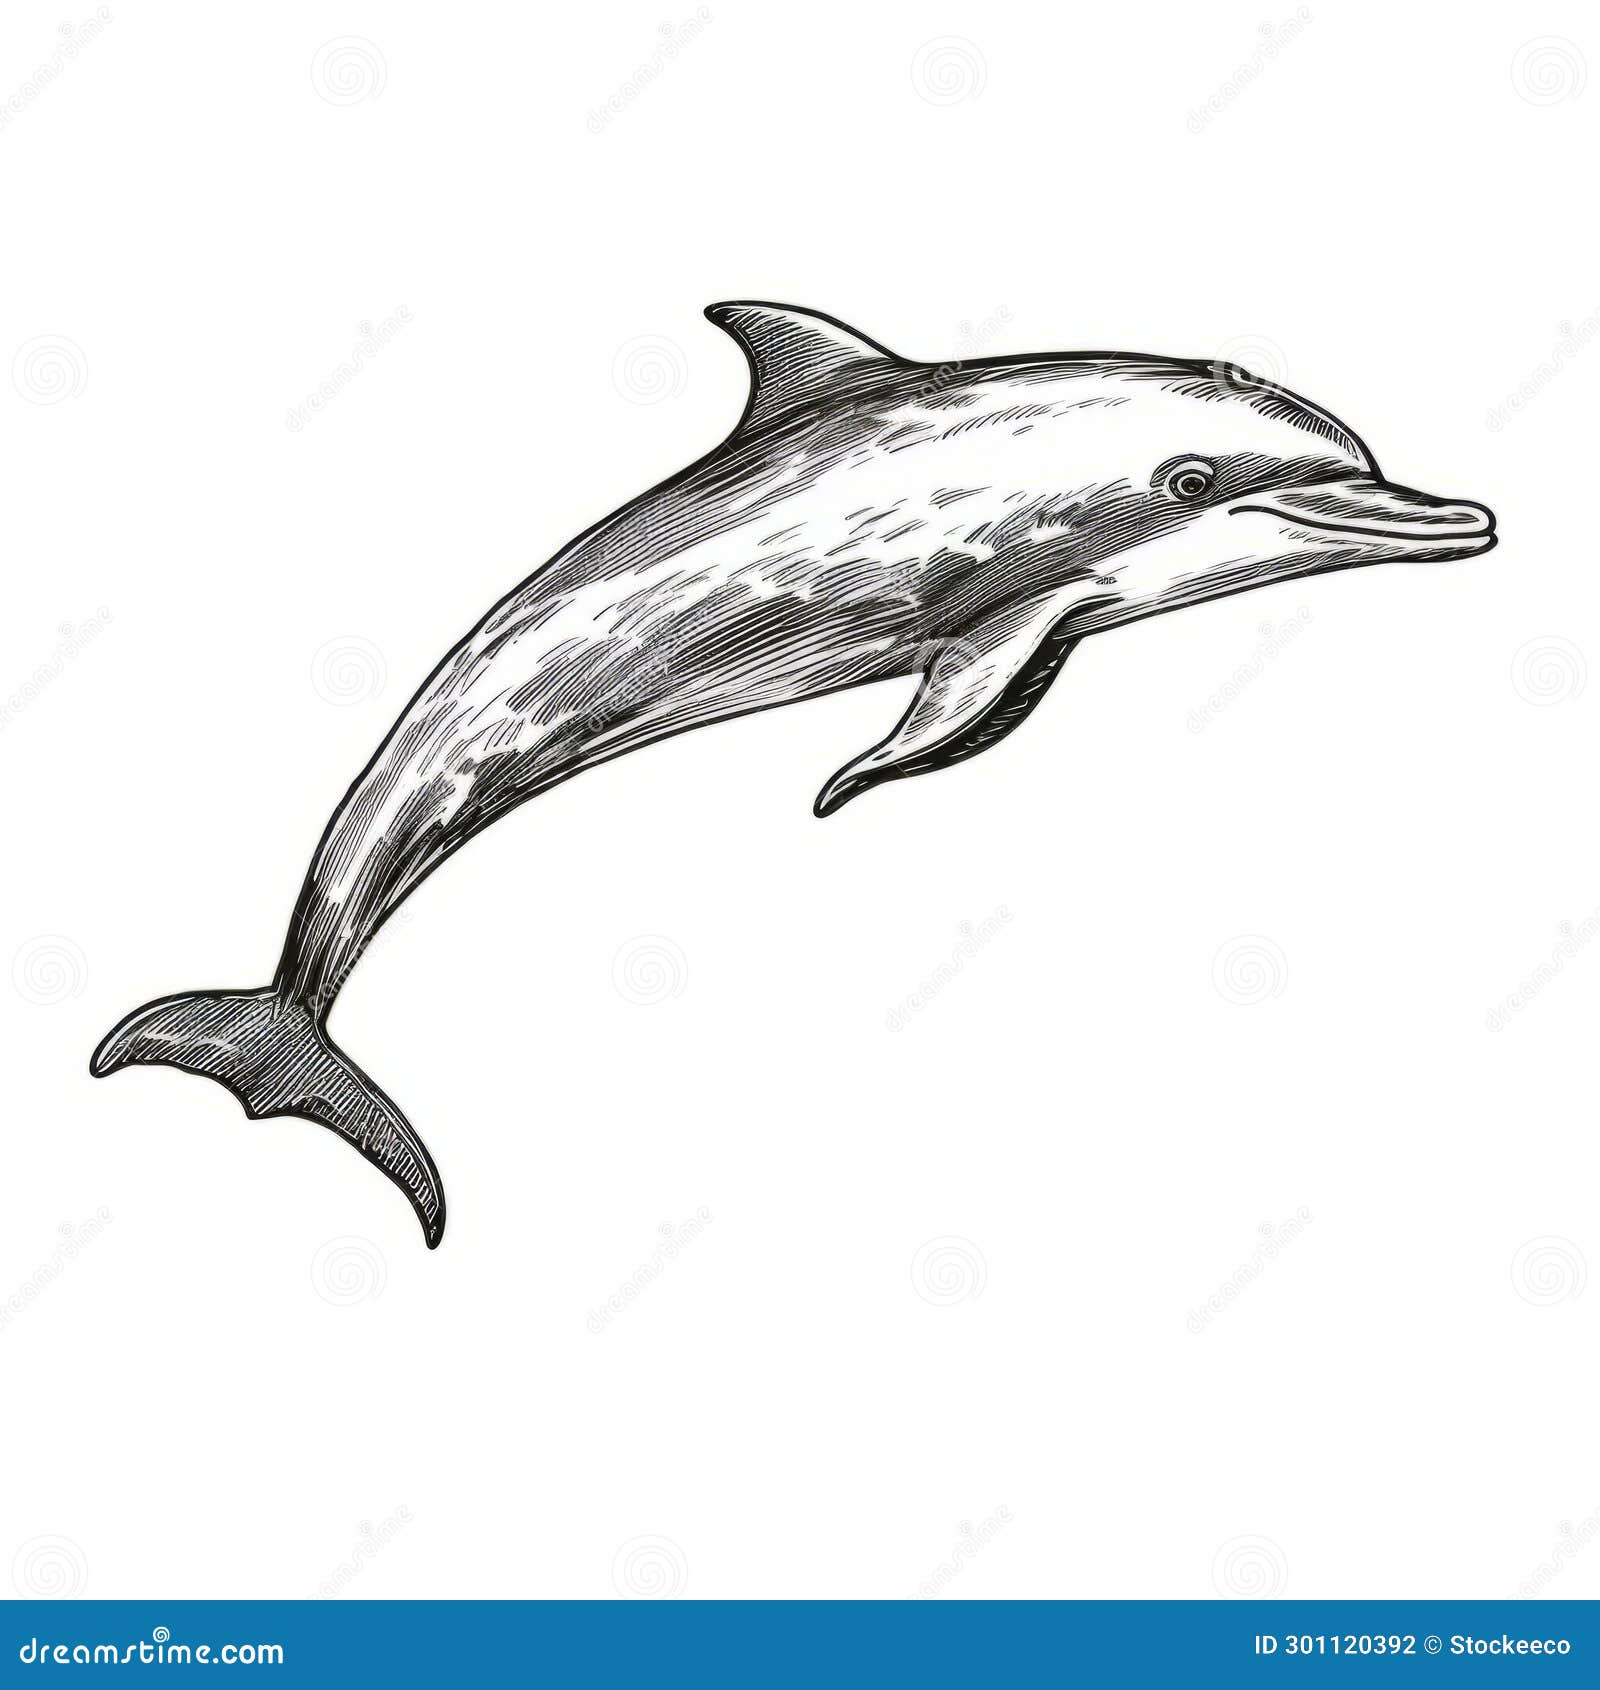 Dolphin Drawing Beginner's Guide [6 Steps + Video]